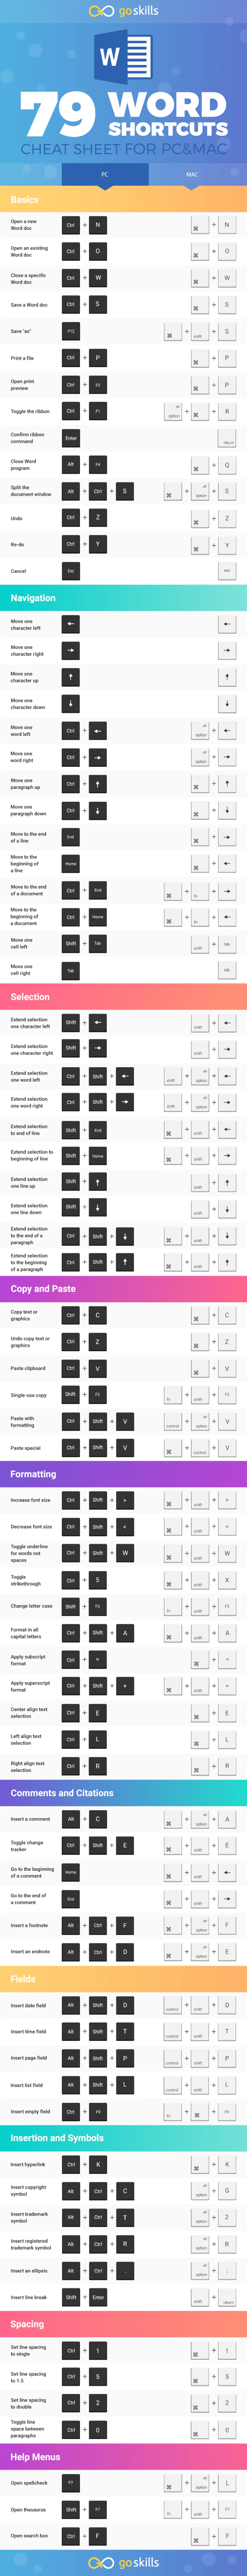 word-shortcuts-infographic-goskills